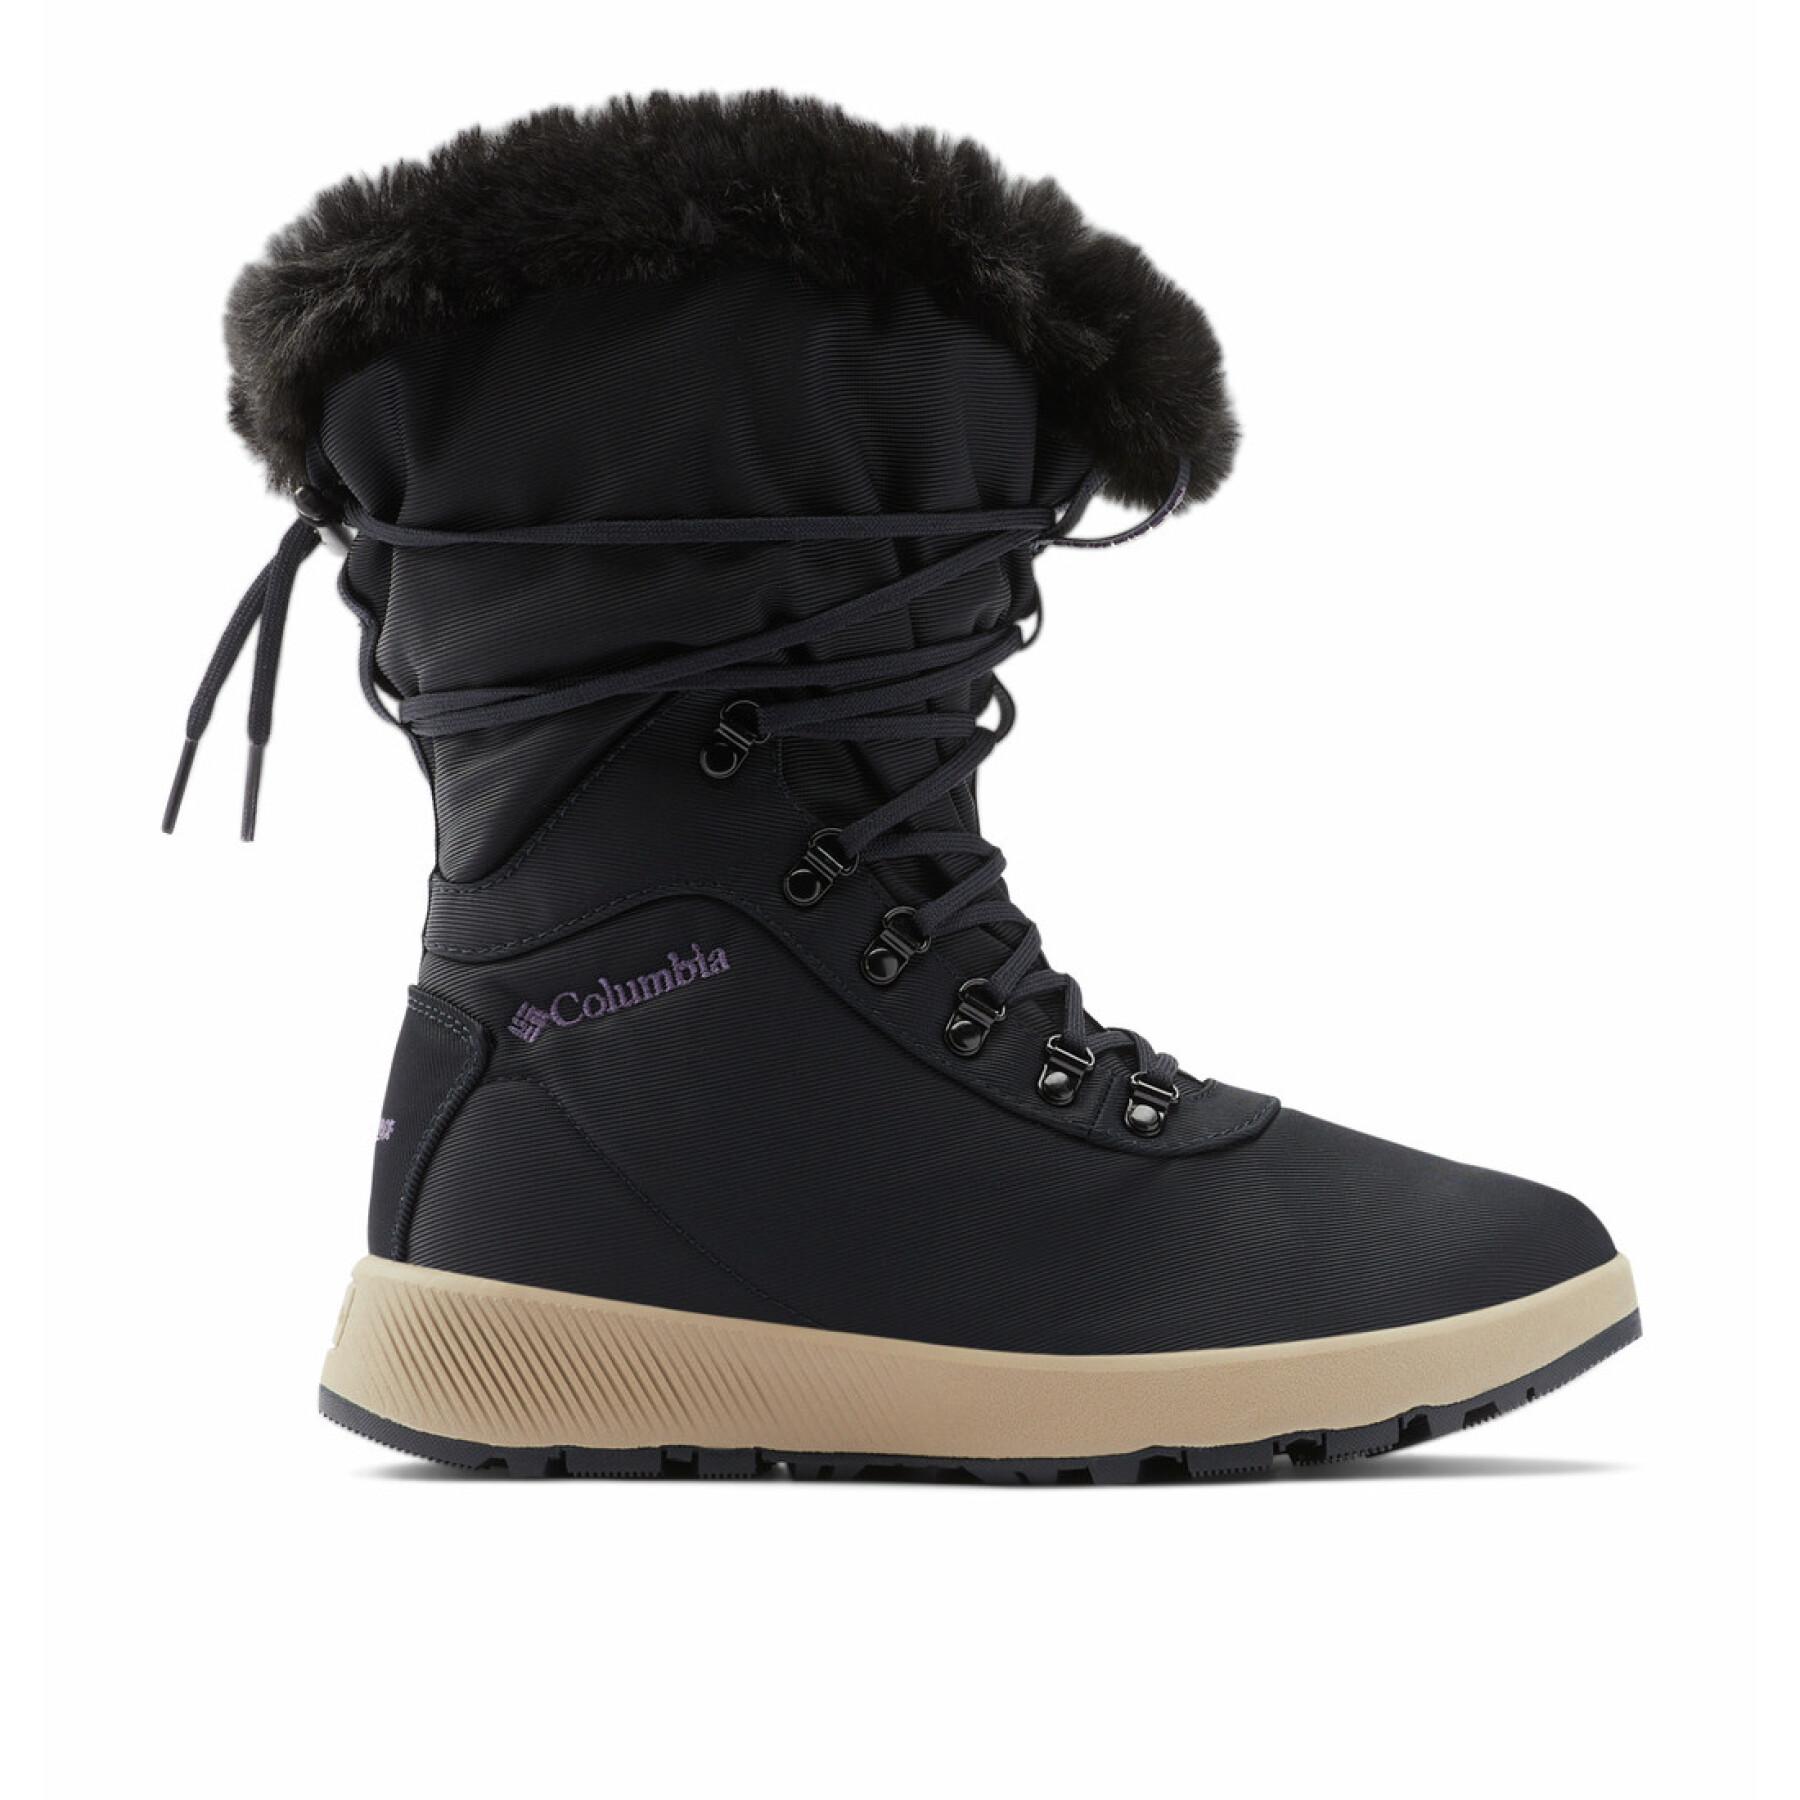 Chaussures femme Columbia Slopeside Village